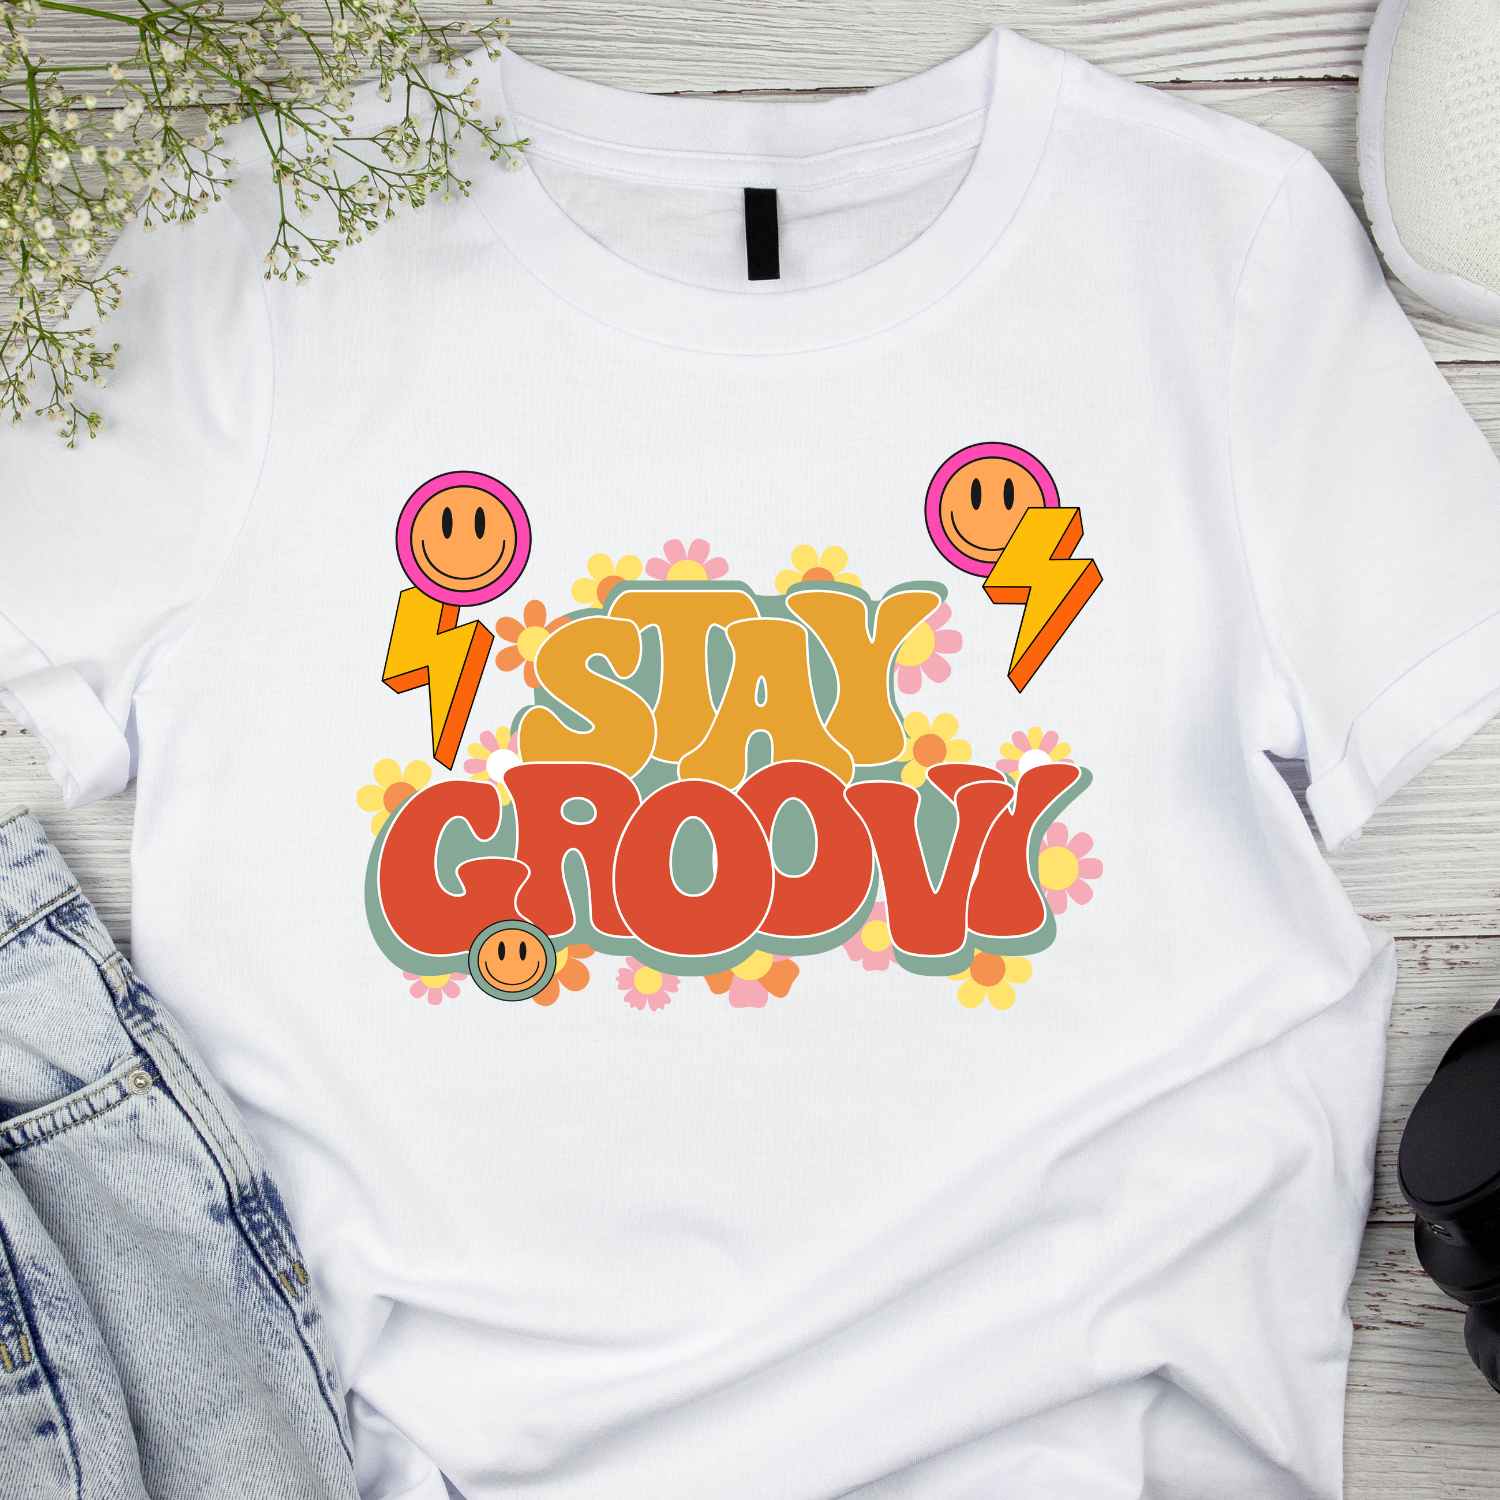 Stay Groovy Colorful T-shirt Design